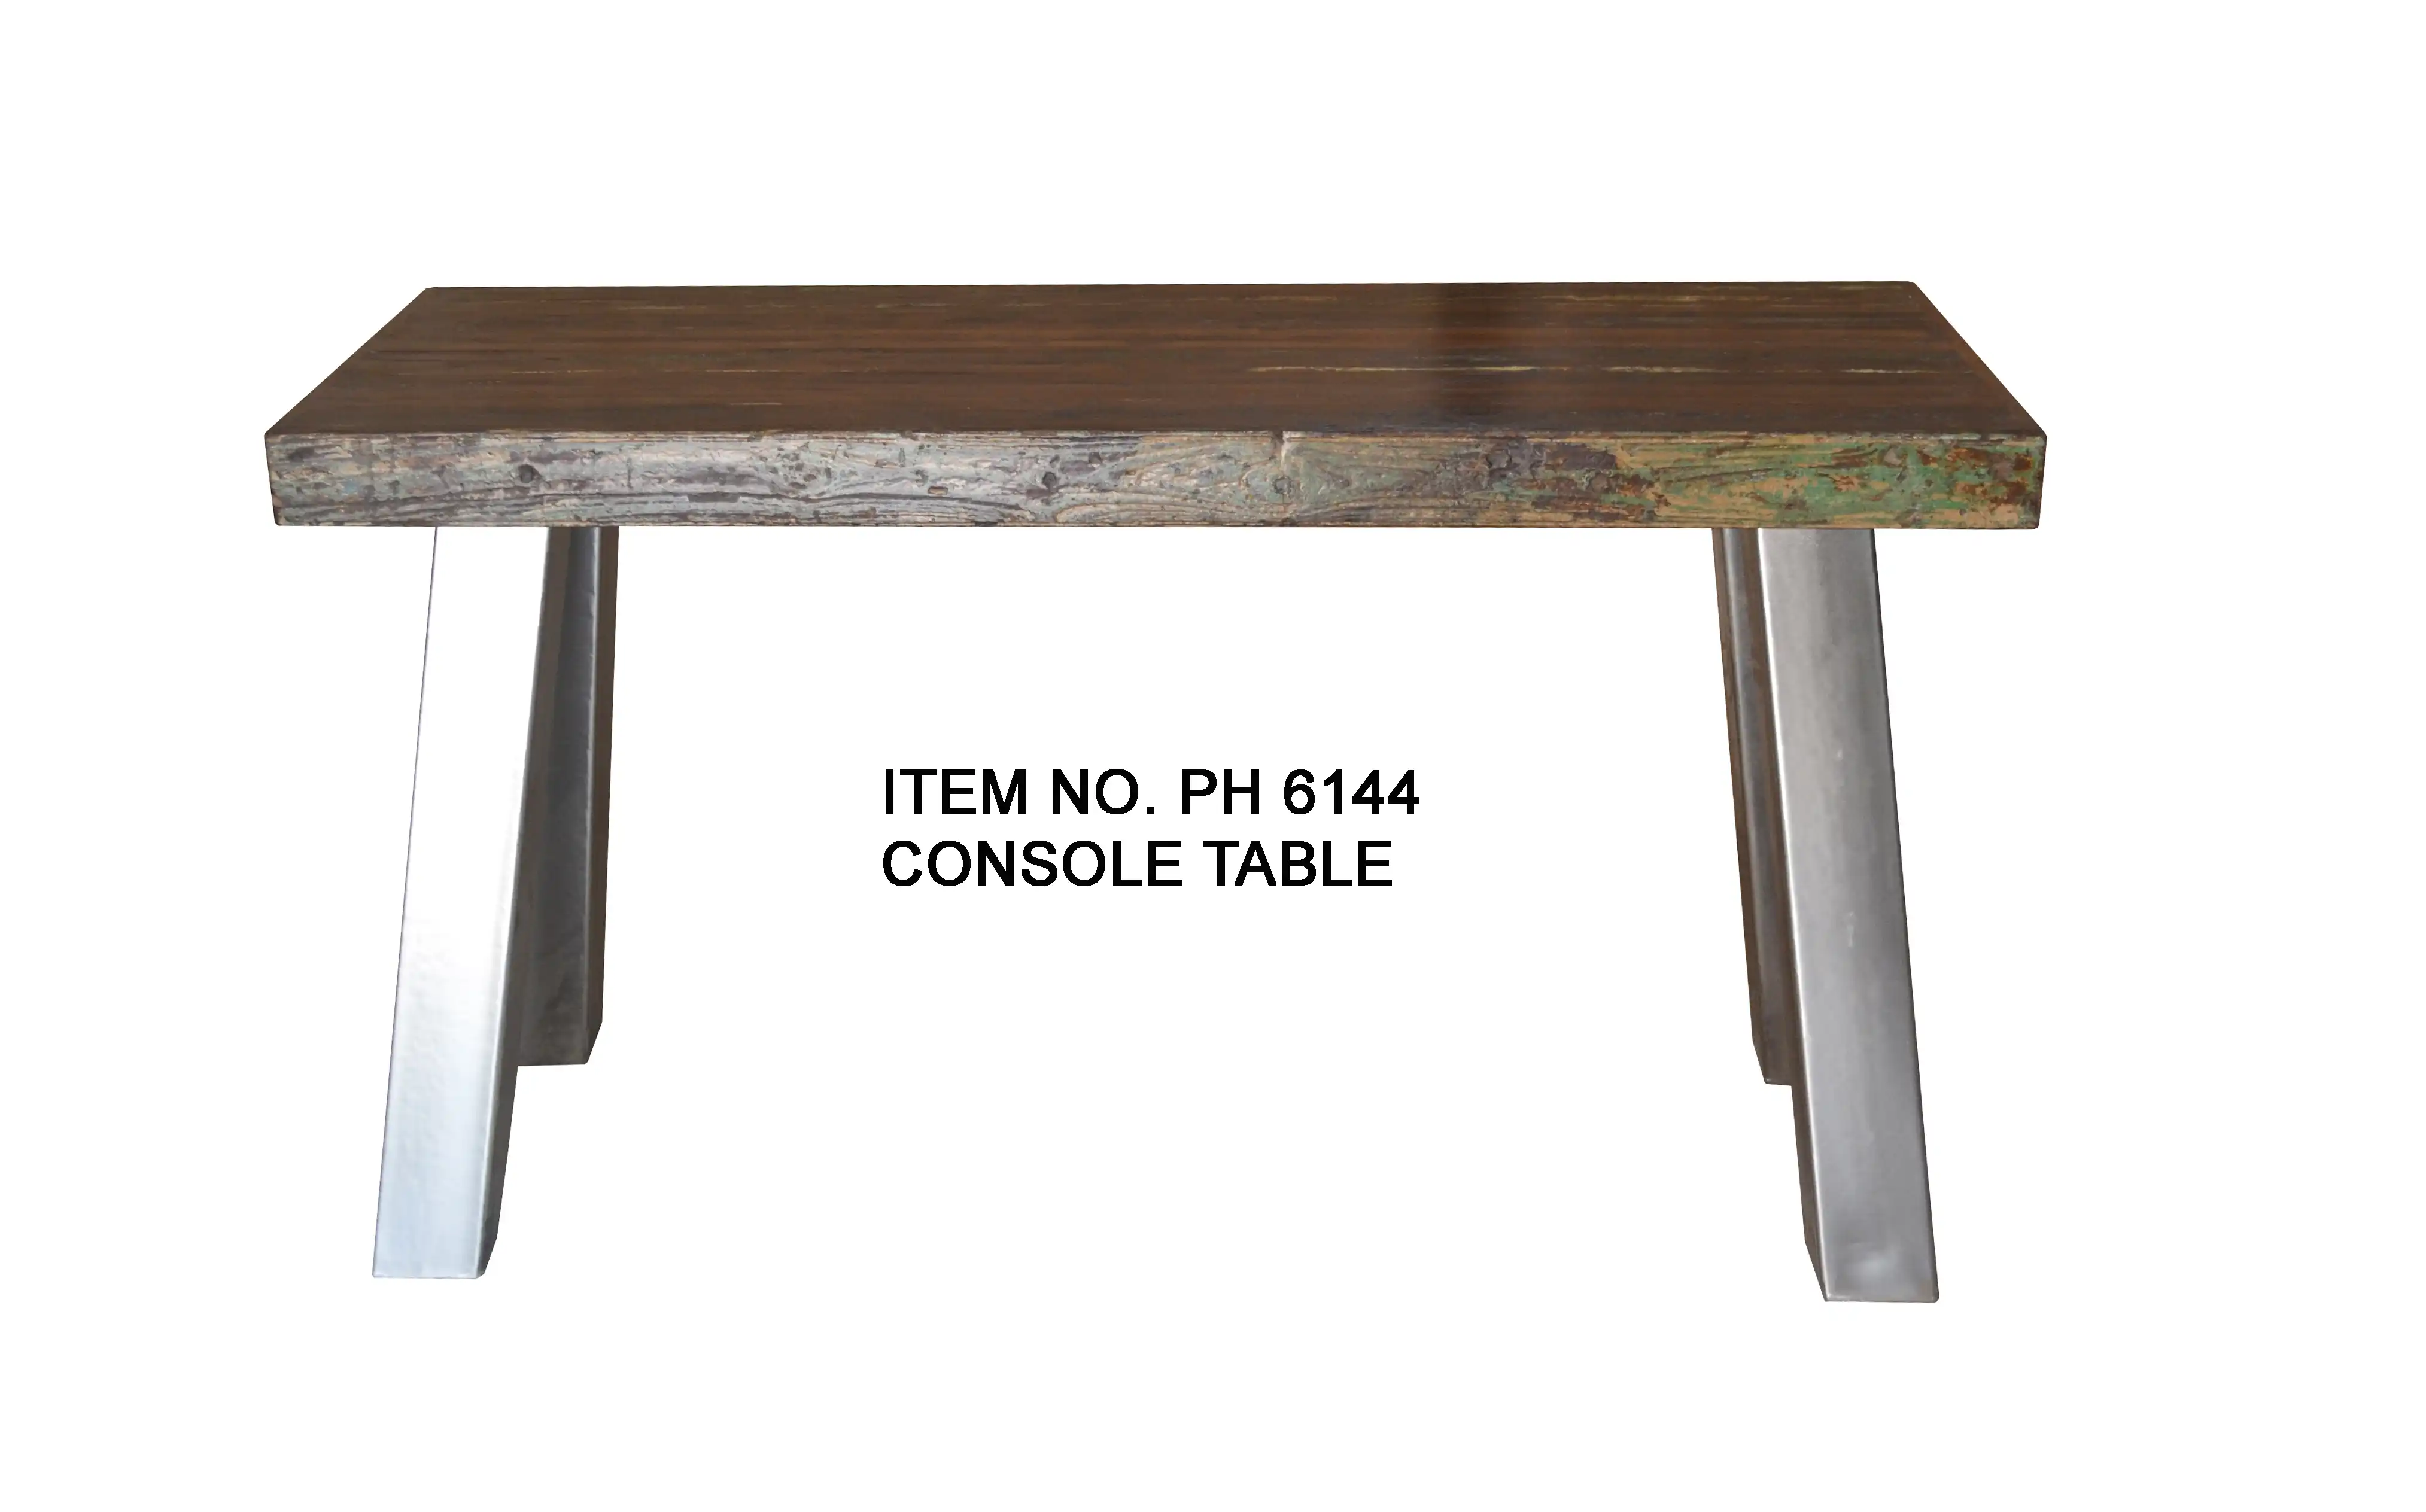 Reclaimed Wood Console Table with Leg Iron (KD) - popular handicrafts